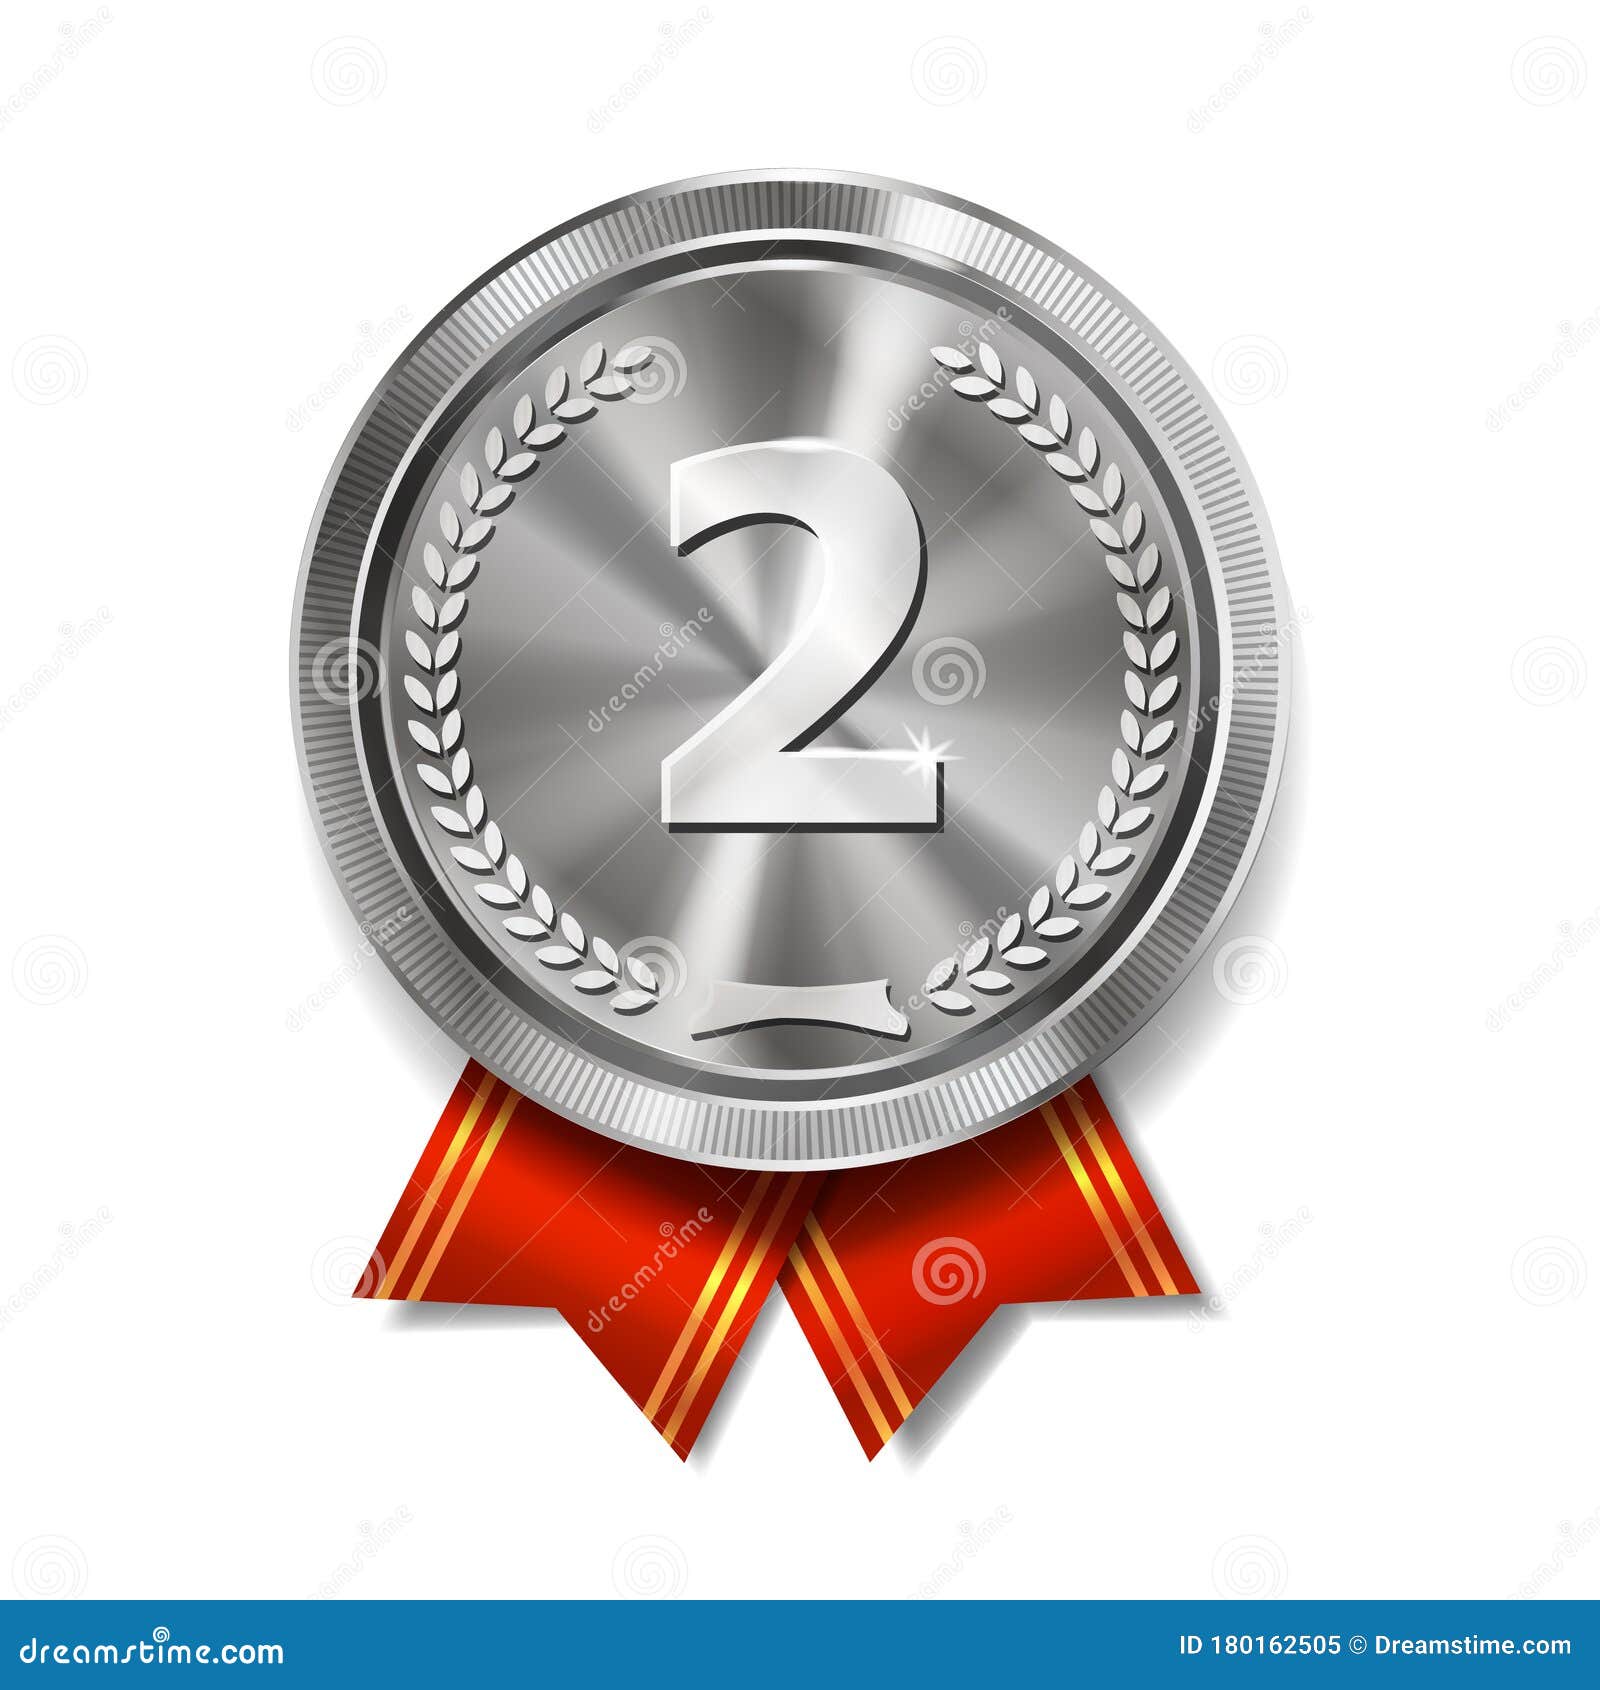 Champion Silver Medal With Red Ribbon On White Background Metallic Winner Award Second Place Stock Vector Illustration Of Metal Laurel